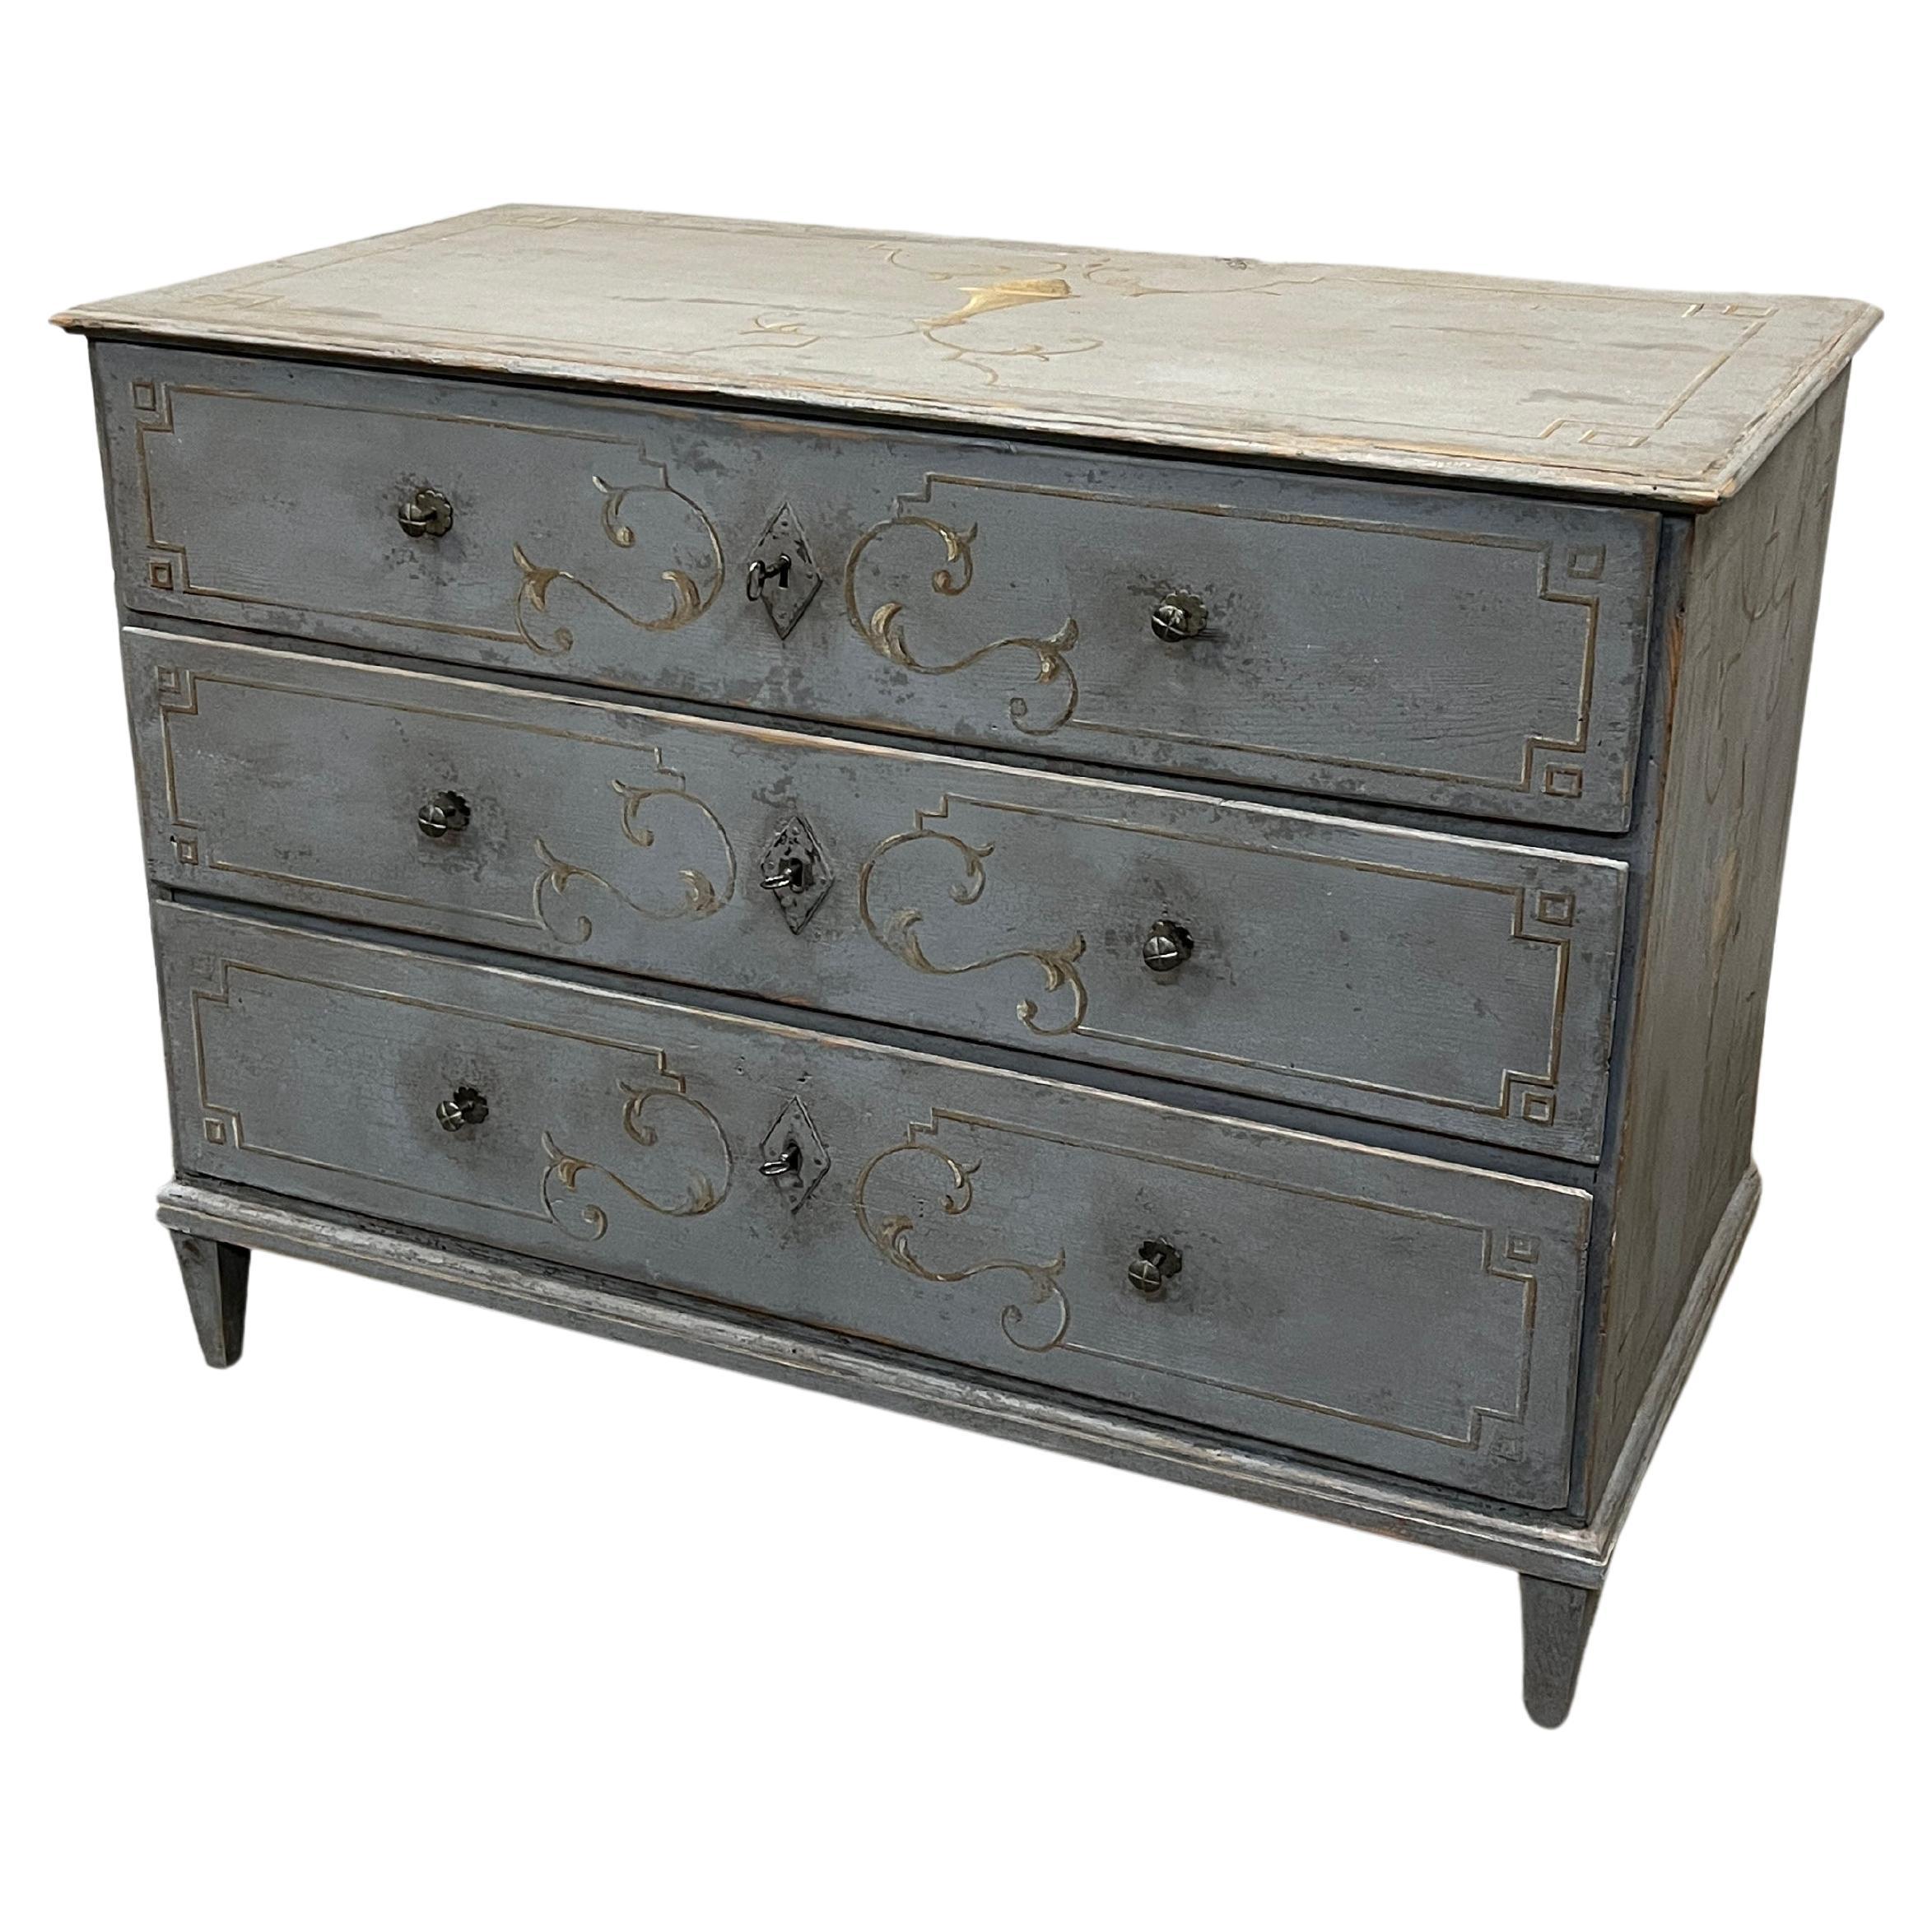 19th Century German Neoclassical Revival Painted Commode For Sale